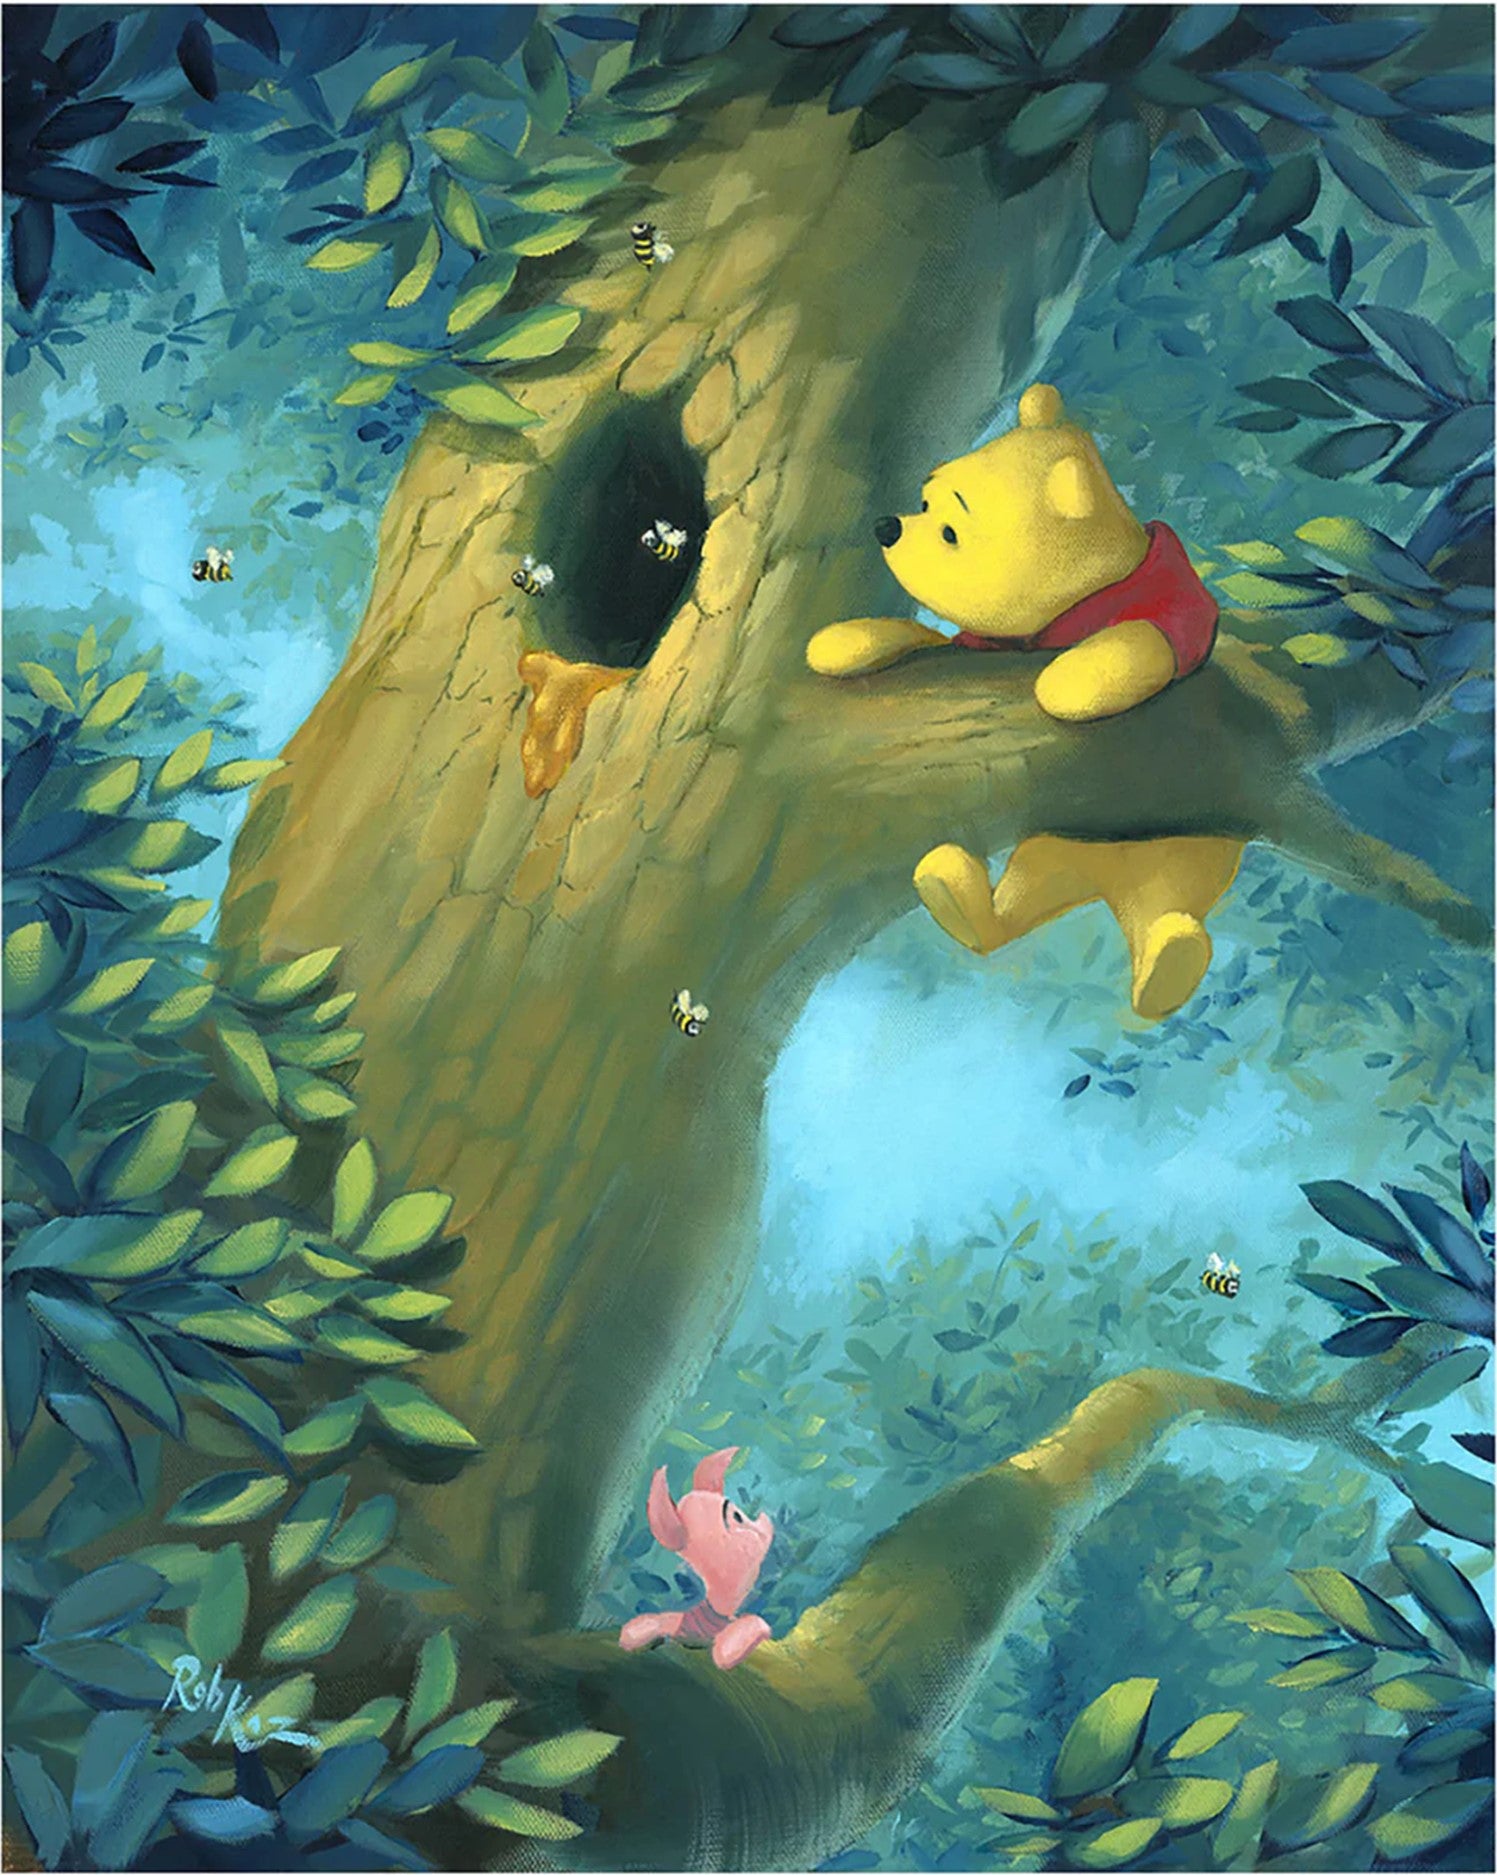 Curious Bear by Rob Kaz inspired by Winnie The Pooh